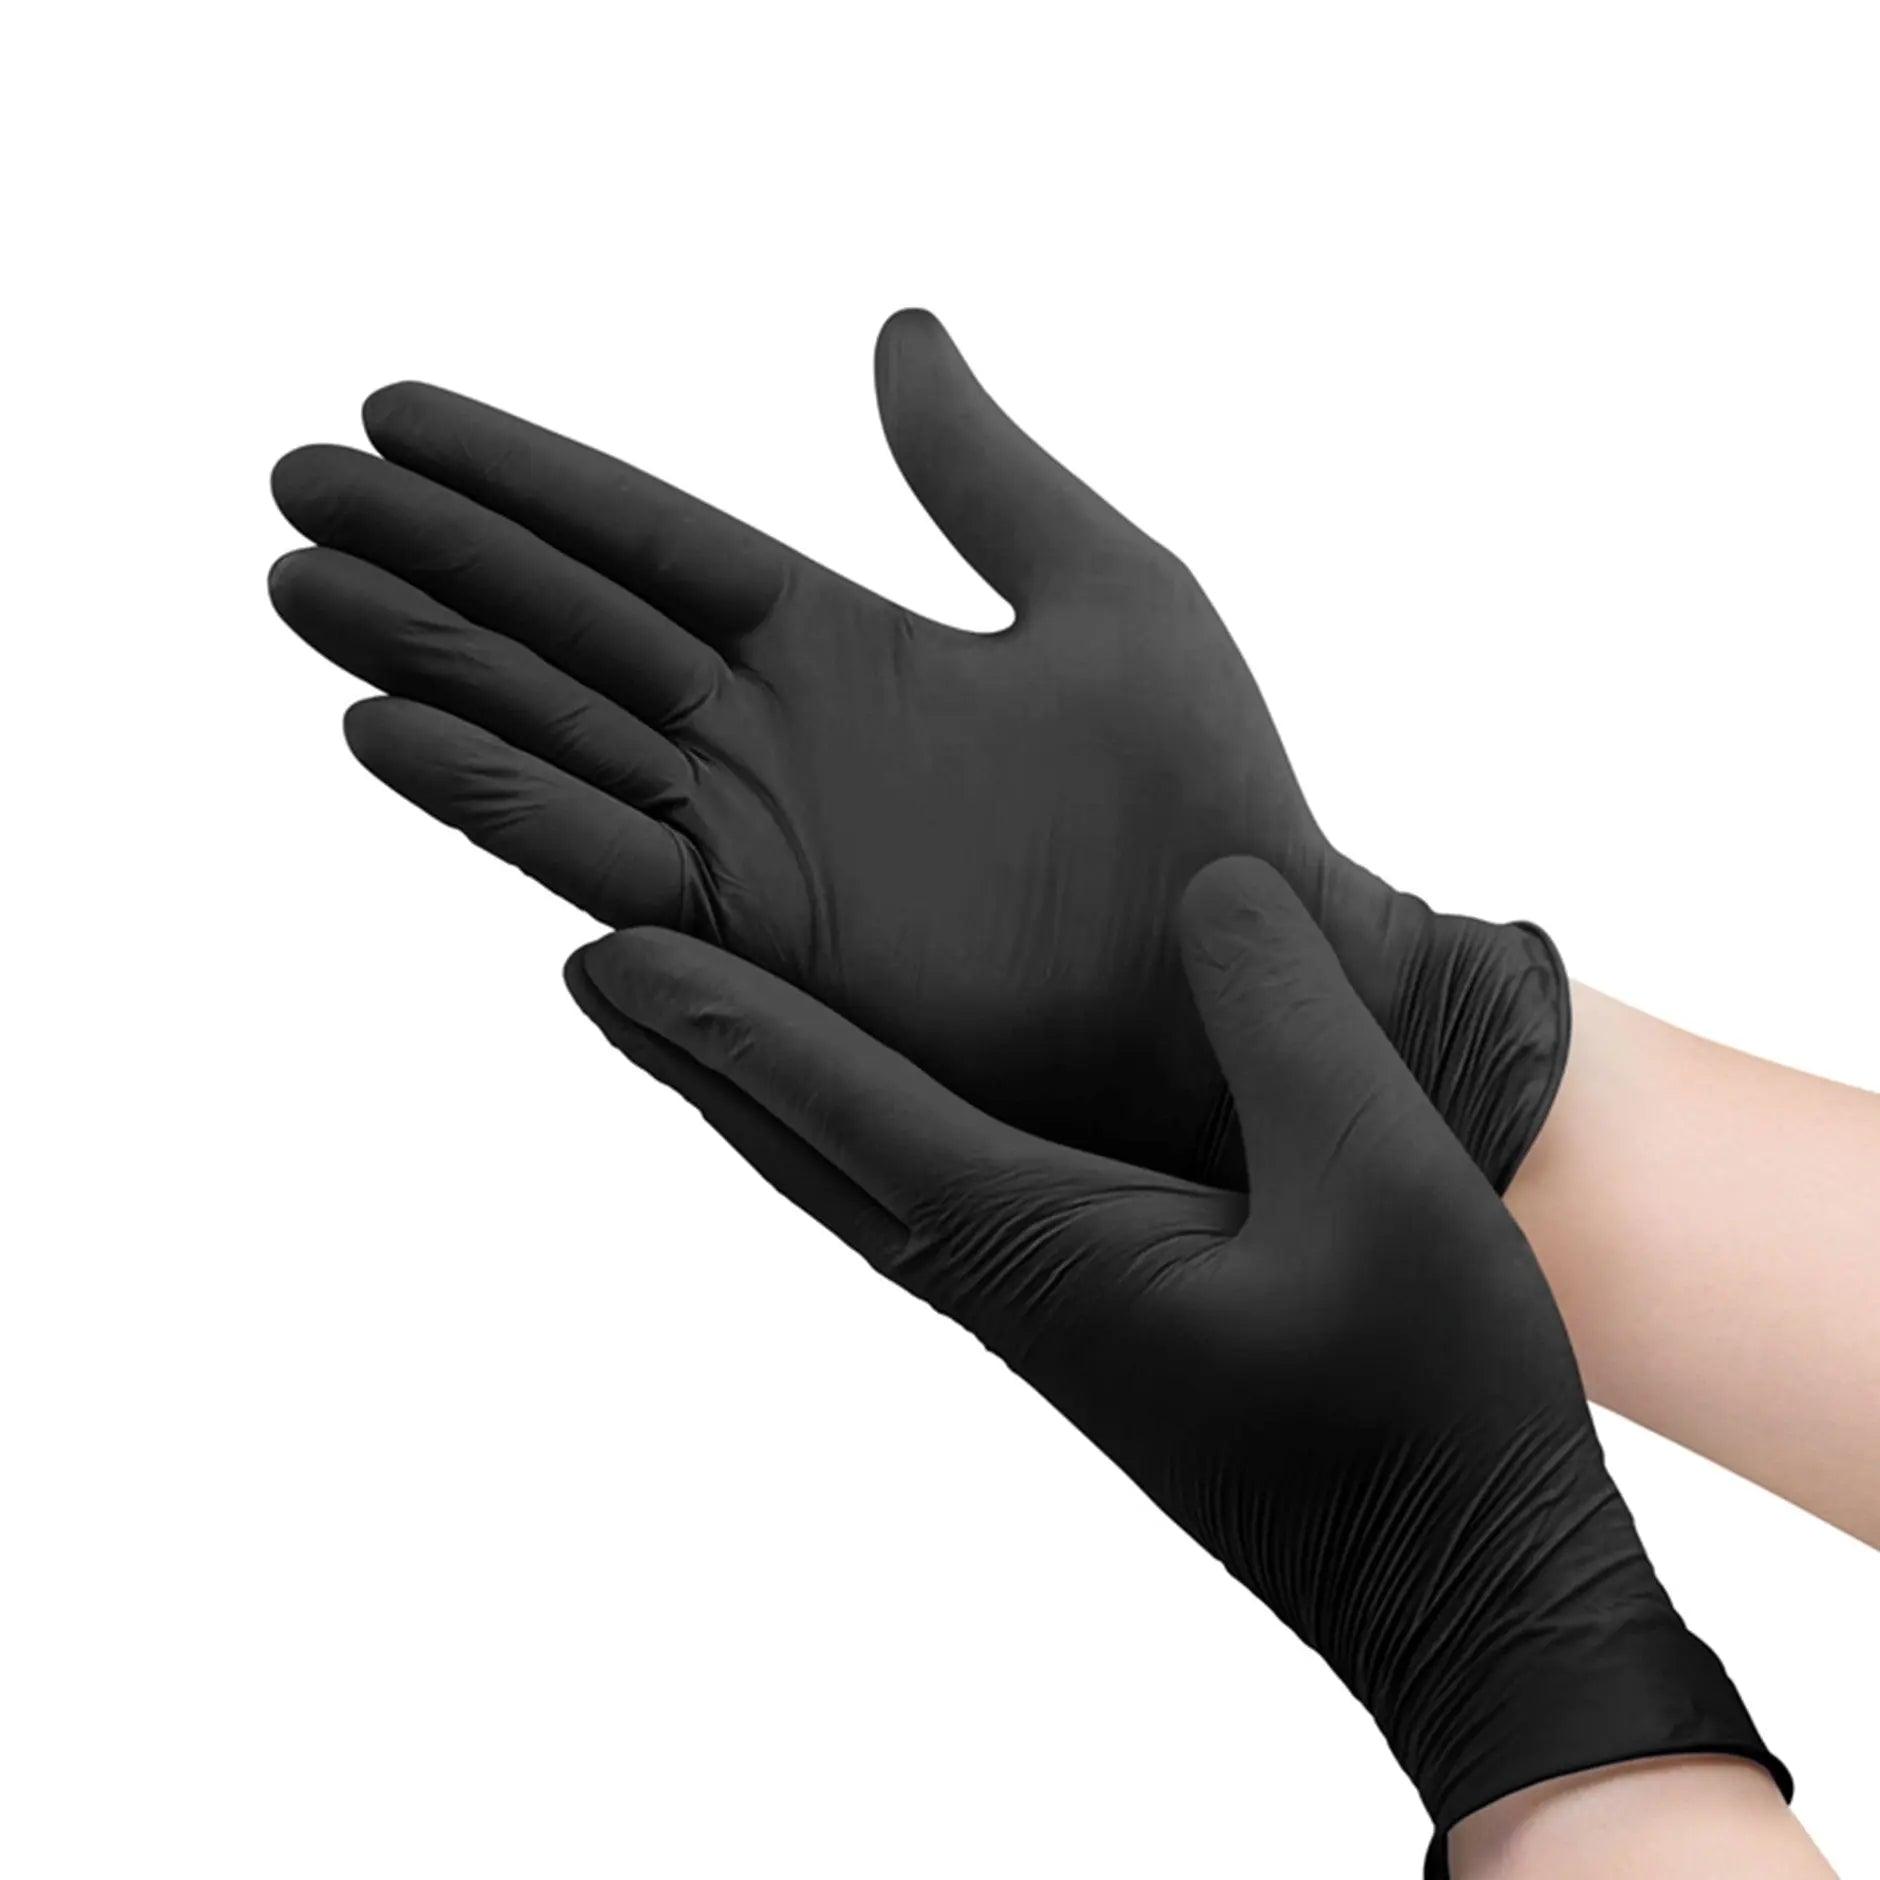 Black Nitrile Nitrile Disposable Gloves for Tattooing - Box of 100 - SINGLE NEEDLE